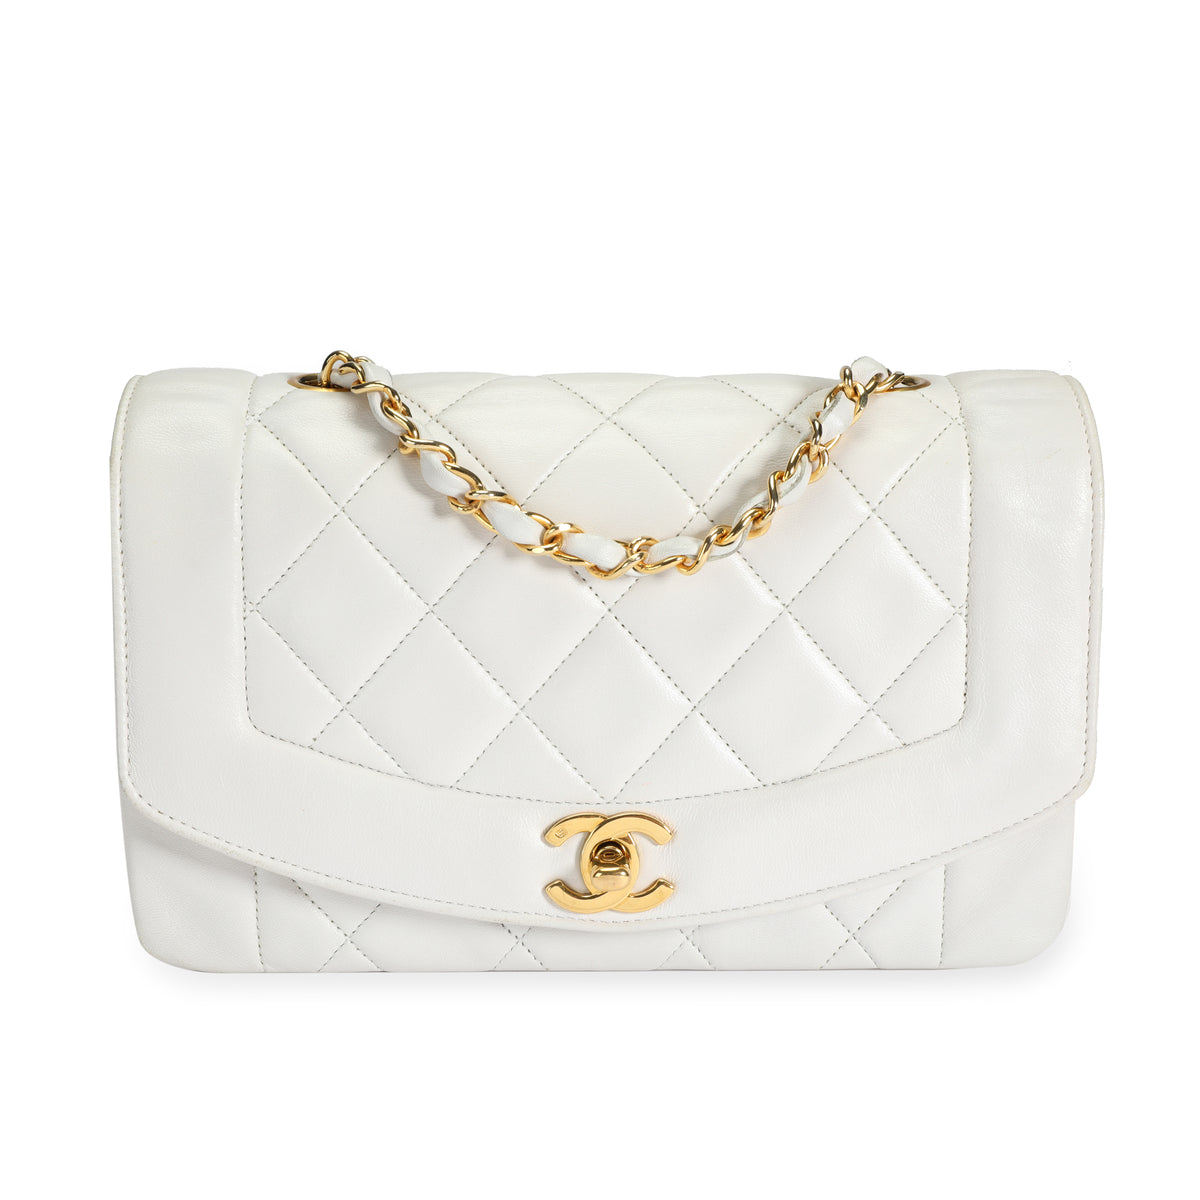 Chanel Vintage White Quilted Lambskin Diana Bag